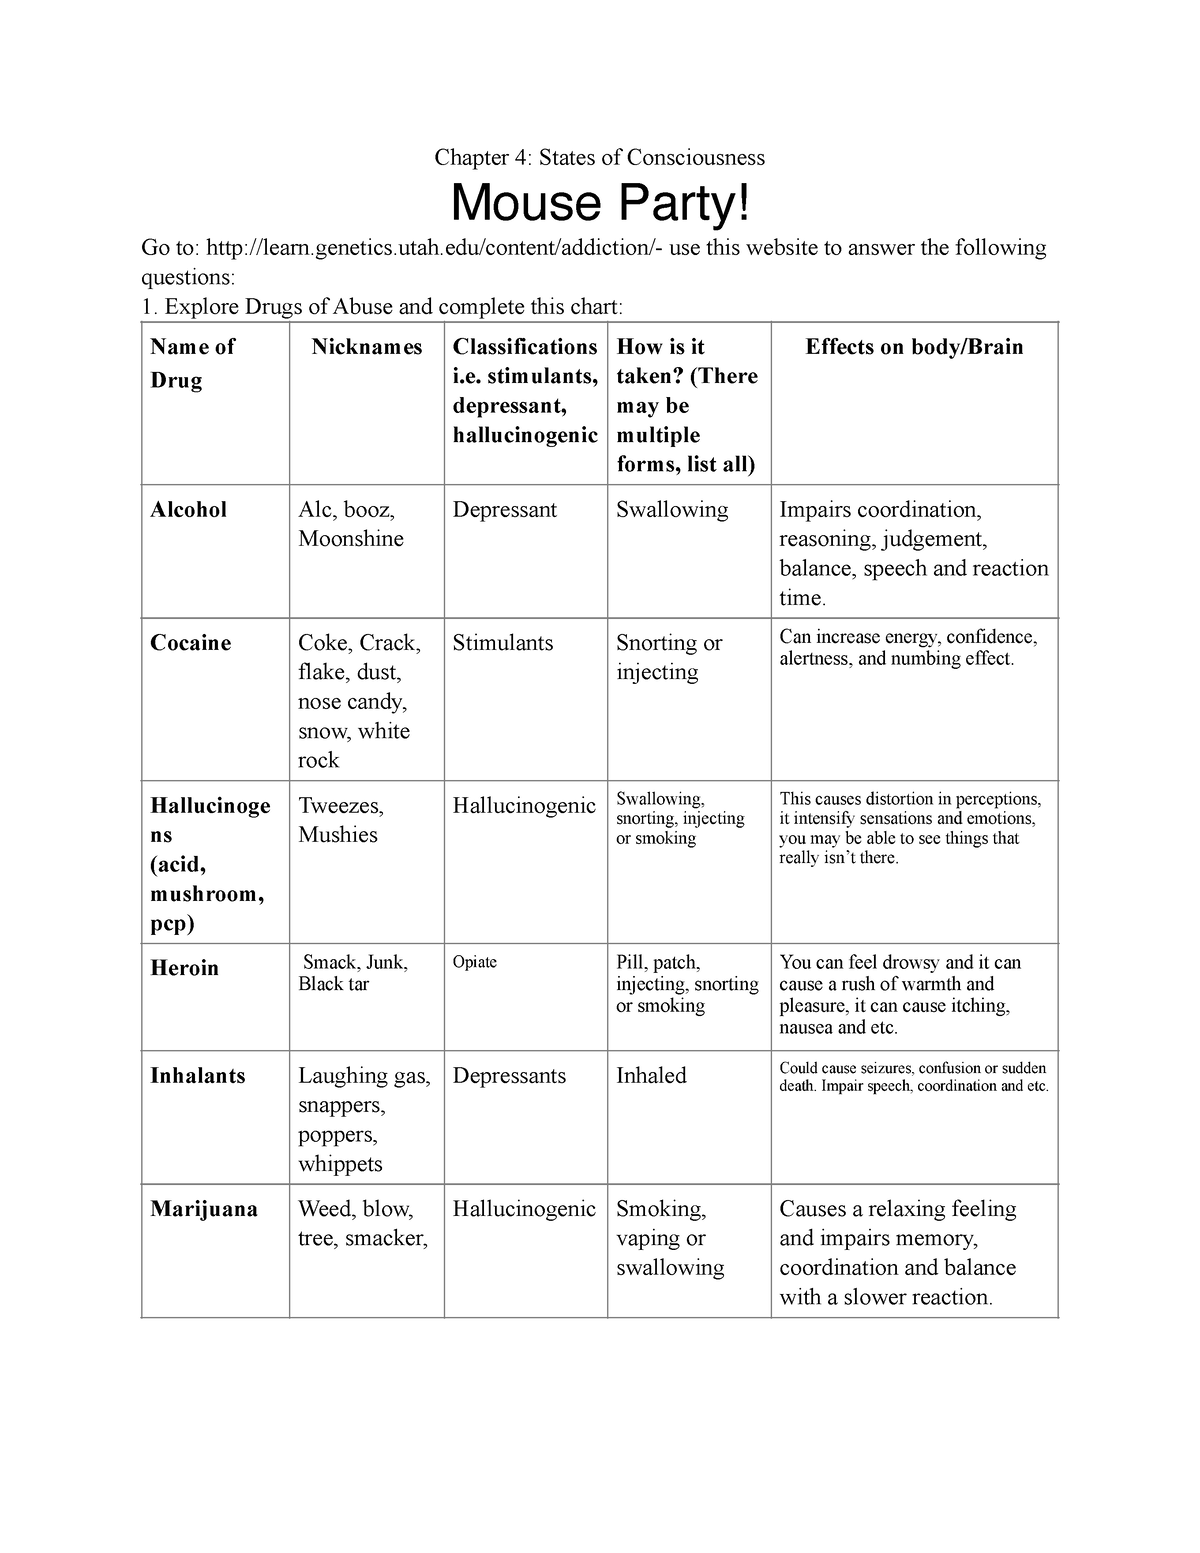 general-psychology-mouse-party-copy-chapter-4-states-of-consciousness-mouse-party-go-to